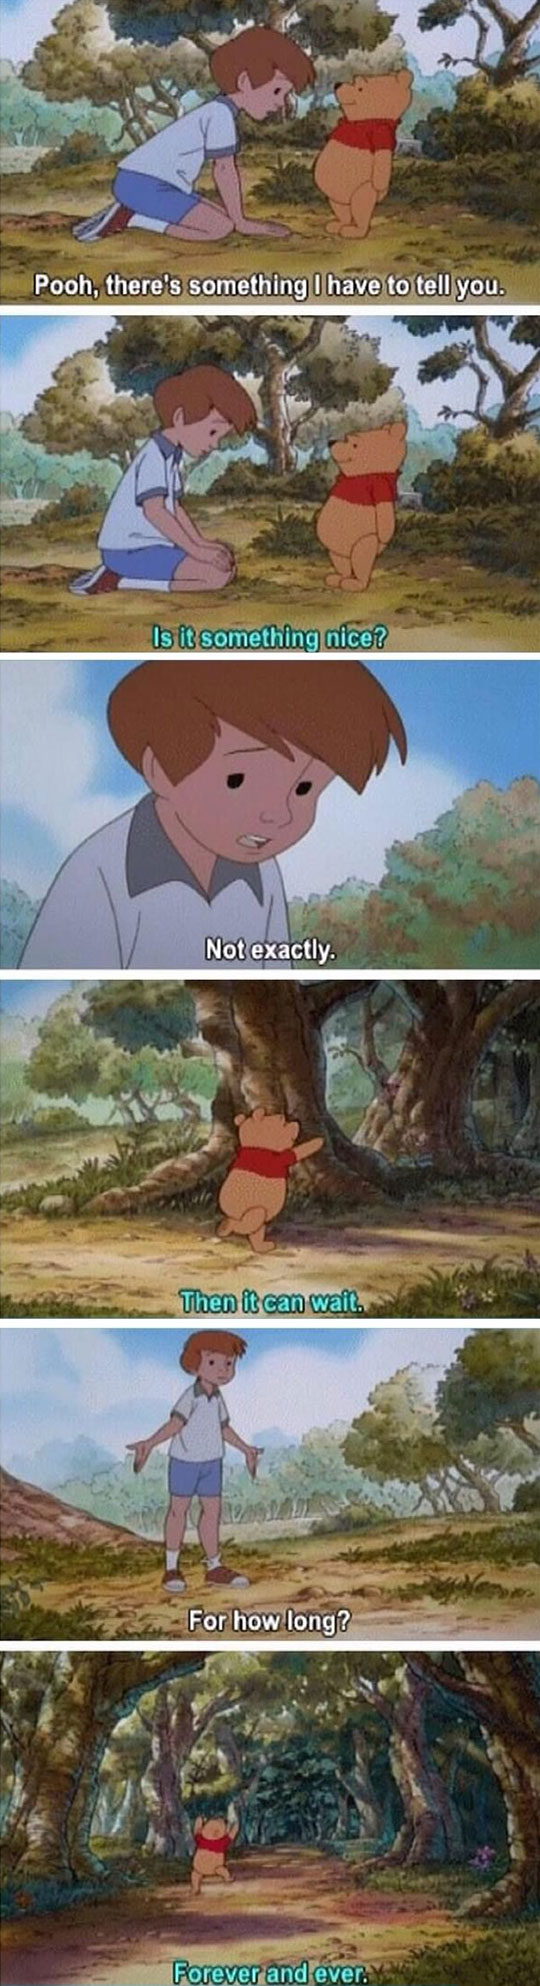 Pooh, there's something I have to tell you...